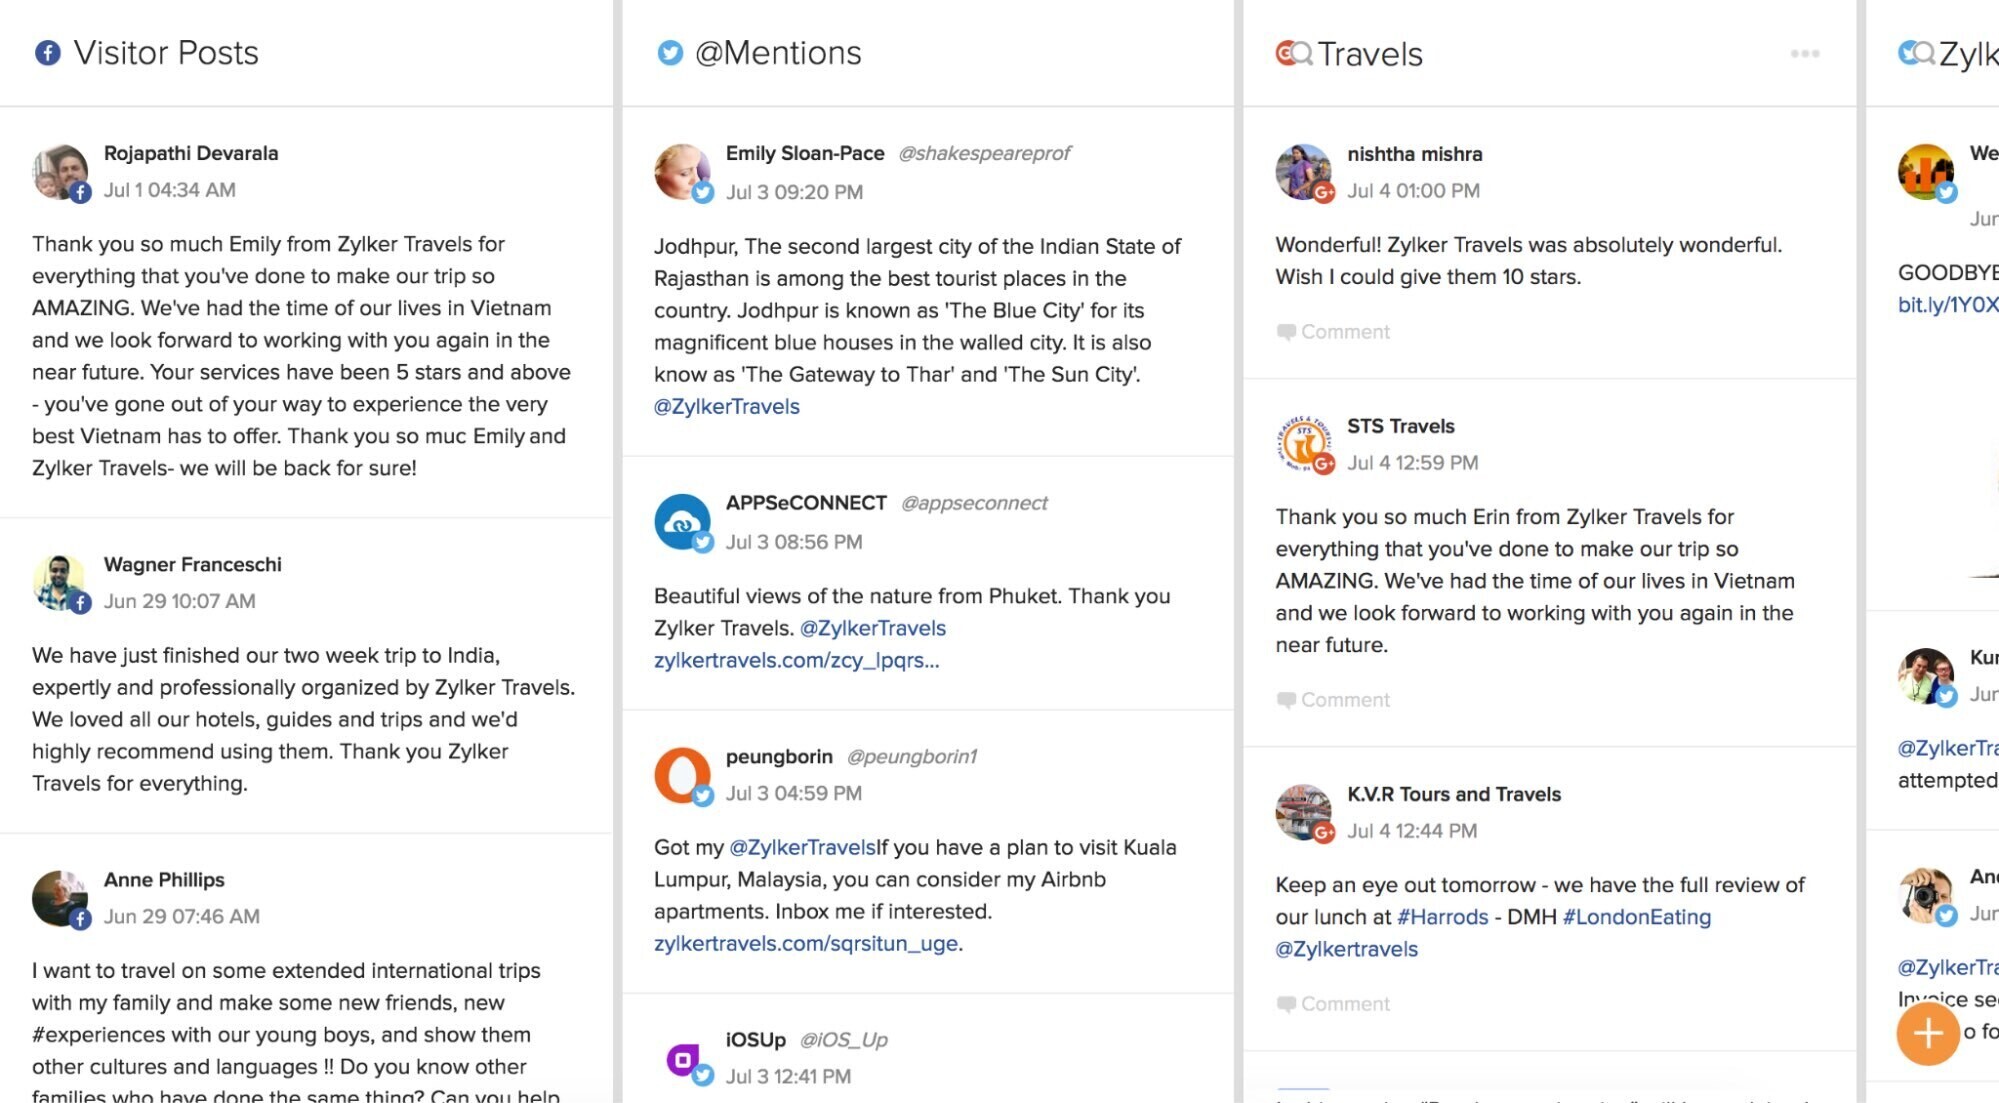 Zoho Social displays customer engagement from different social media platforms, including Facebook, Twitter, and Google+